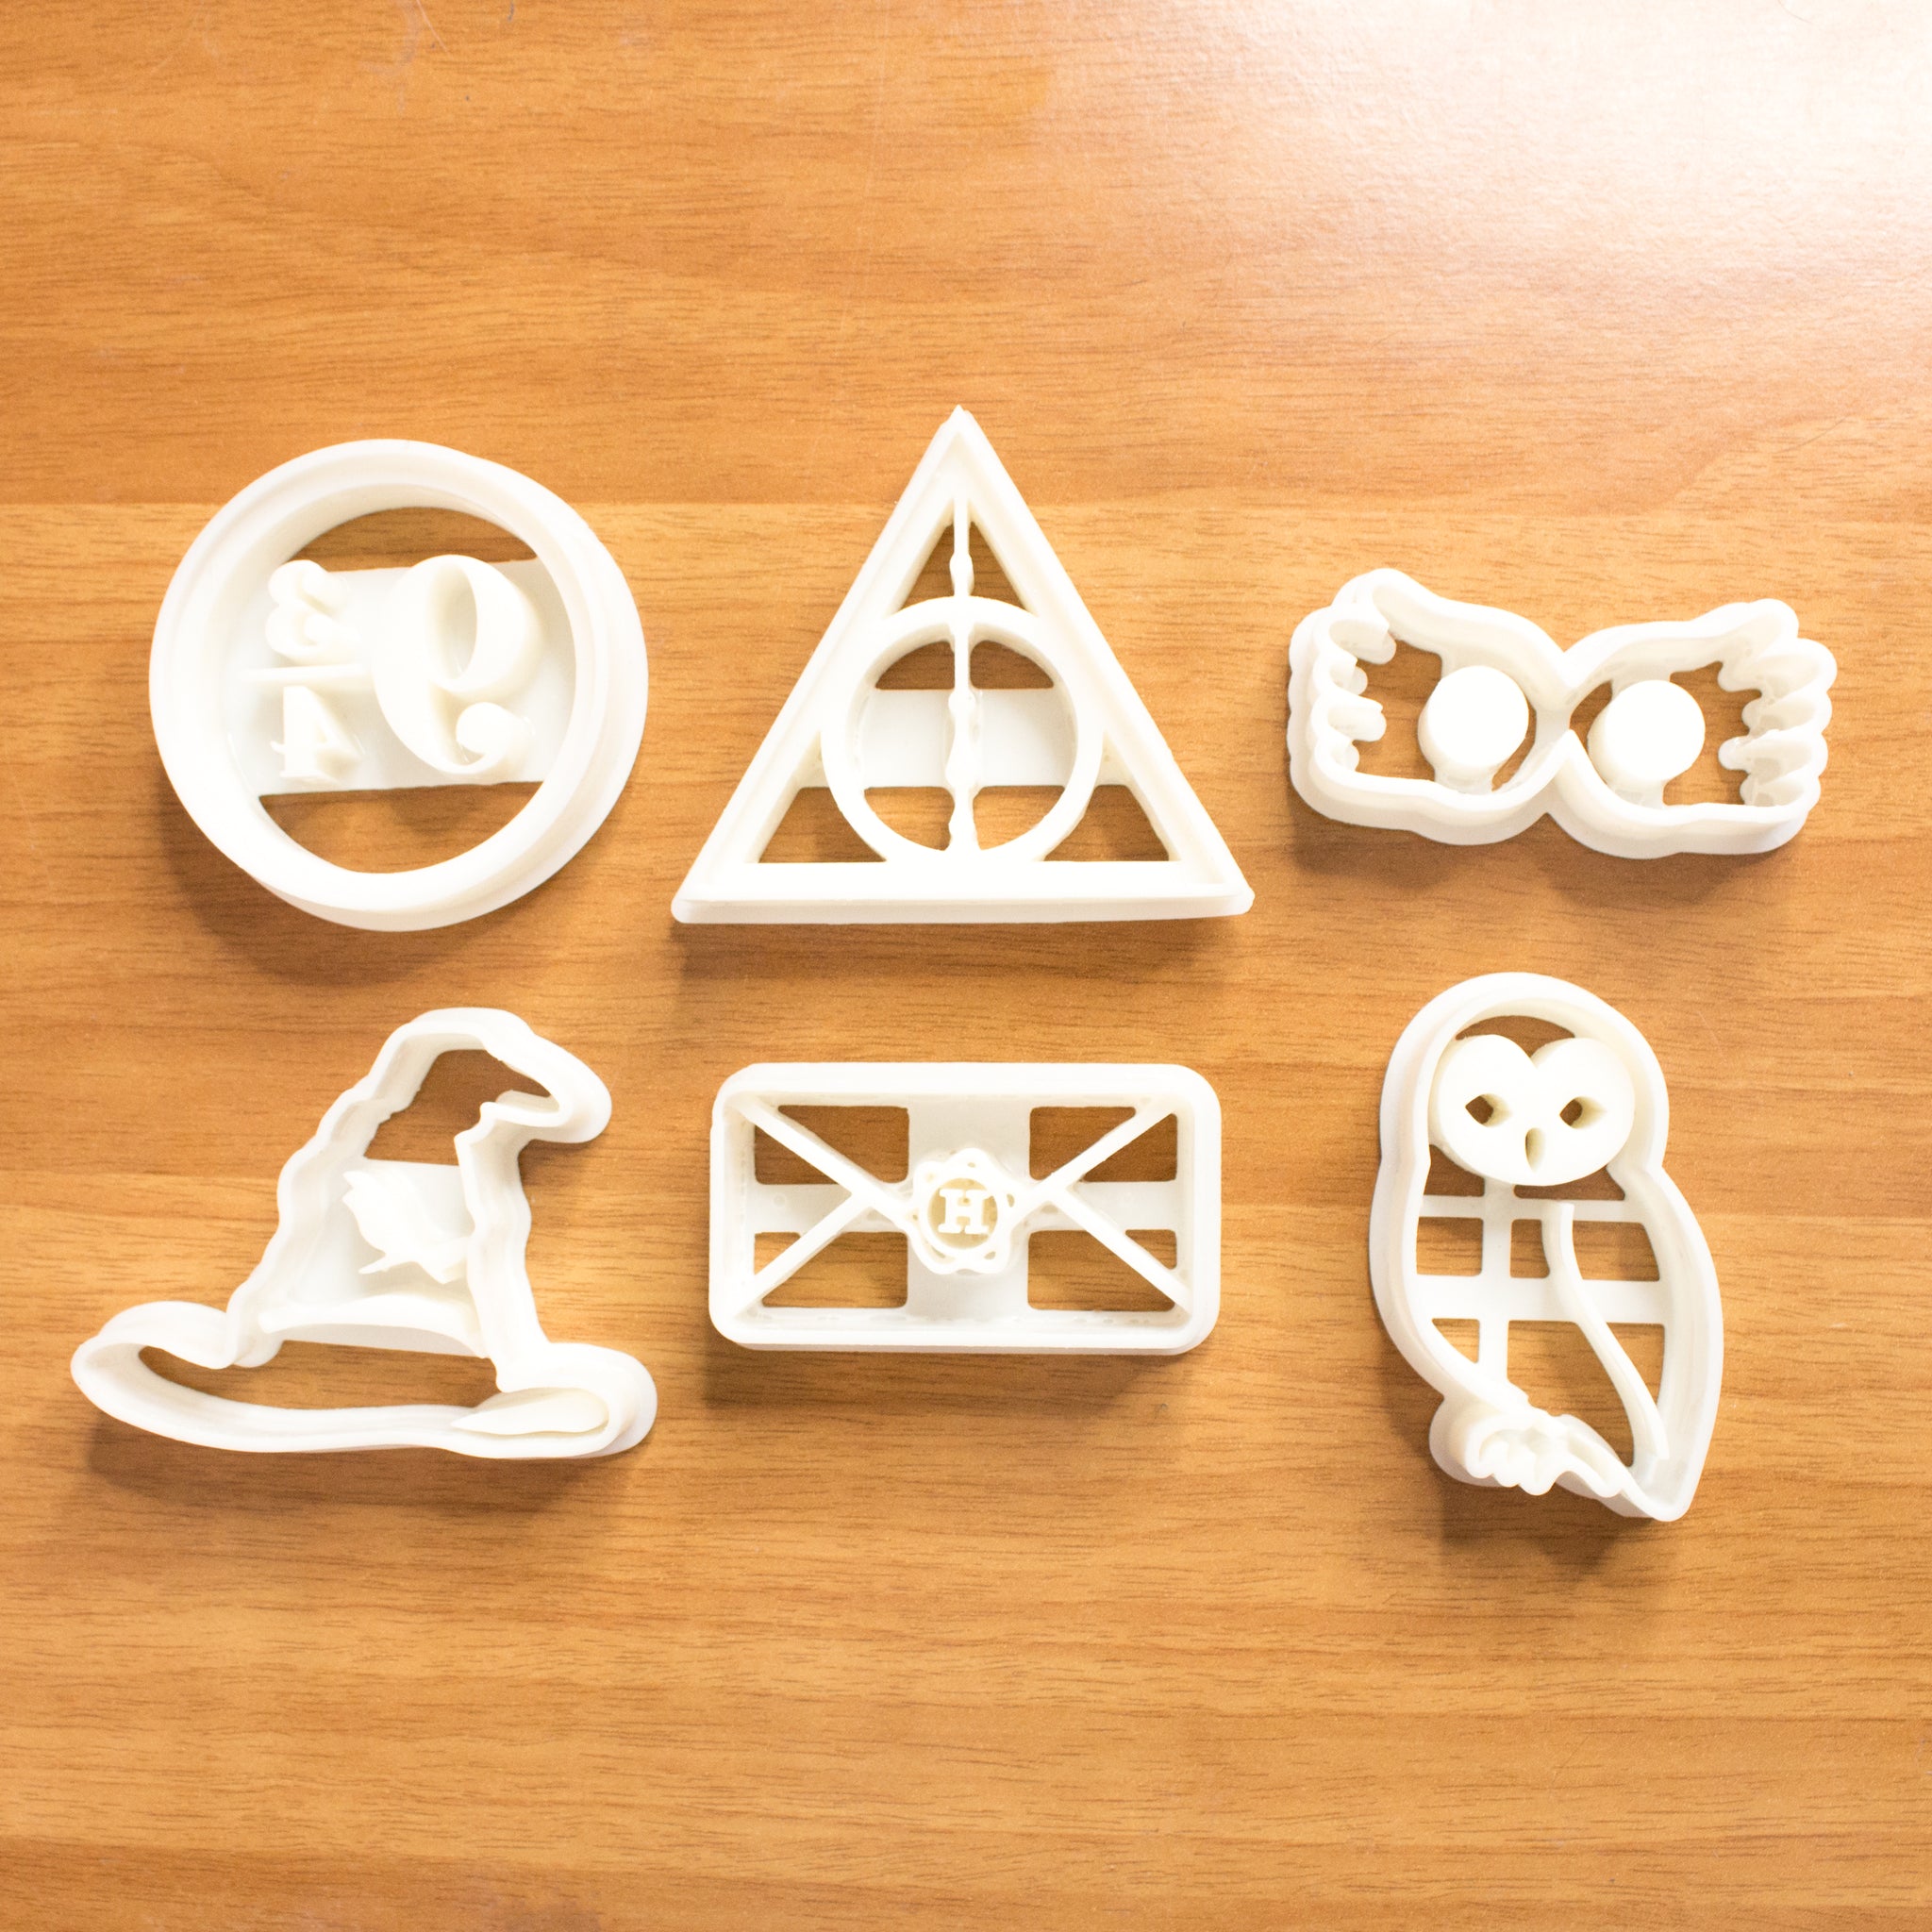 Harry Potter Cookie Cutters - collectibles - by owner - sale